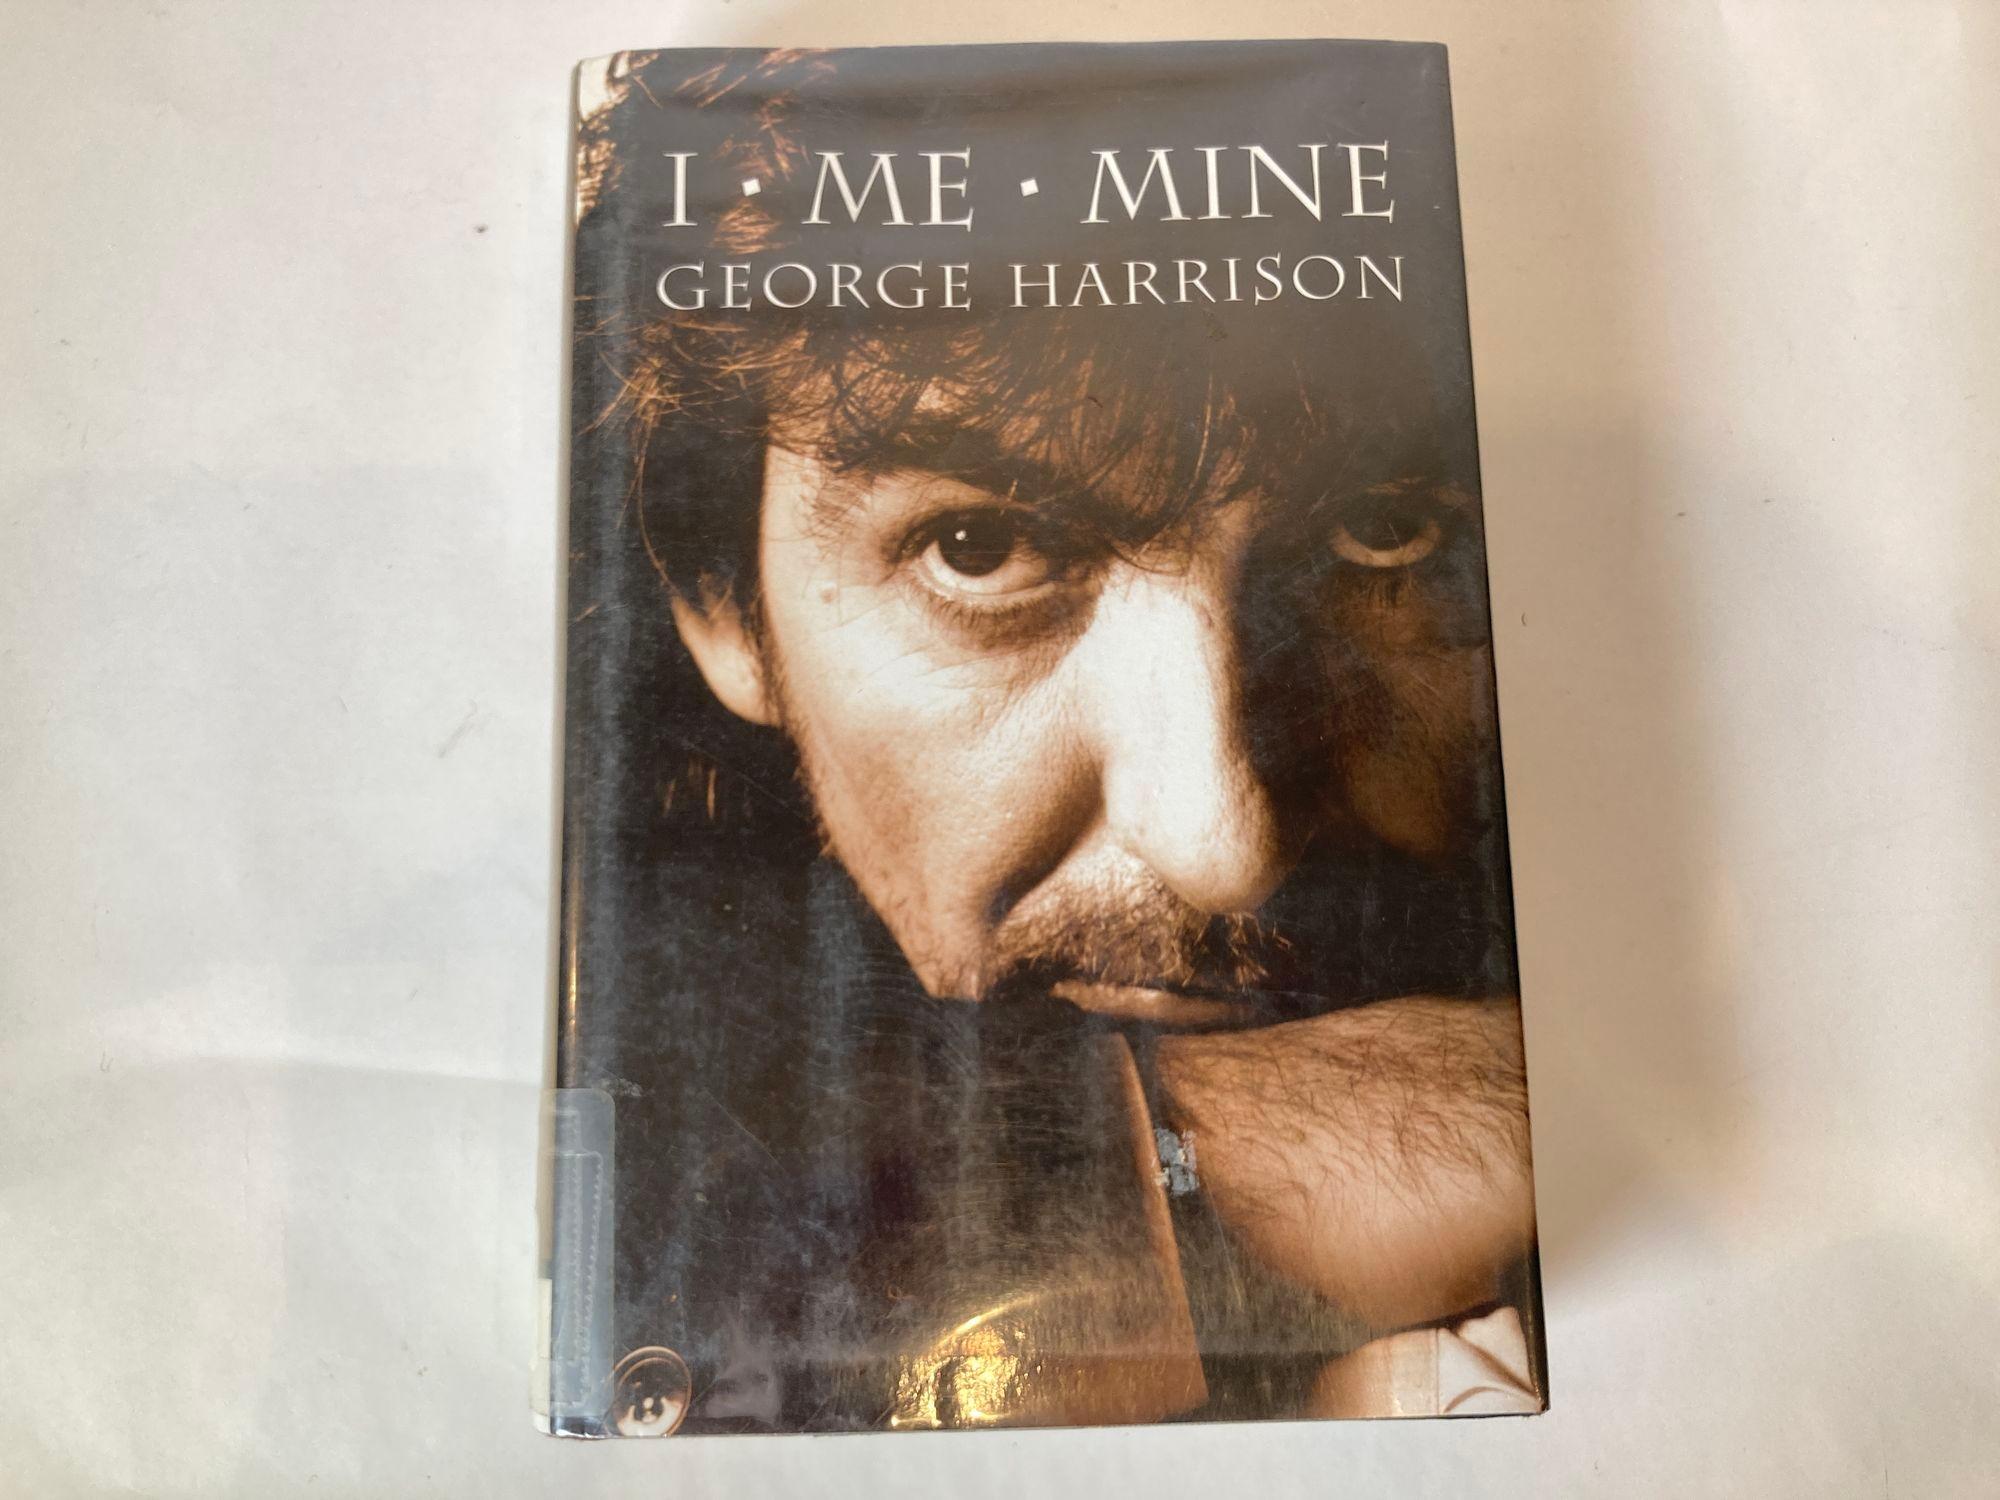 I, Me, Mine is an autobiographic memoir by the English musician George Harrison, formerly of The Beatles.
It was first published in 1980 as a hand-bound, limited edition book by Genesis Publications, with a mixture of printed text and multi-colour